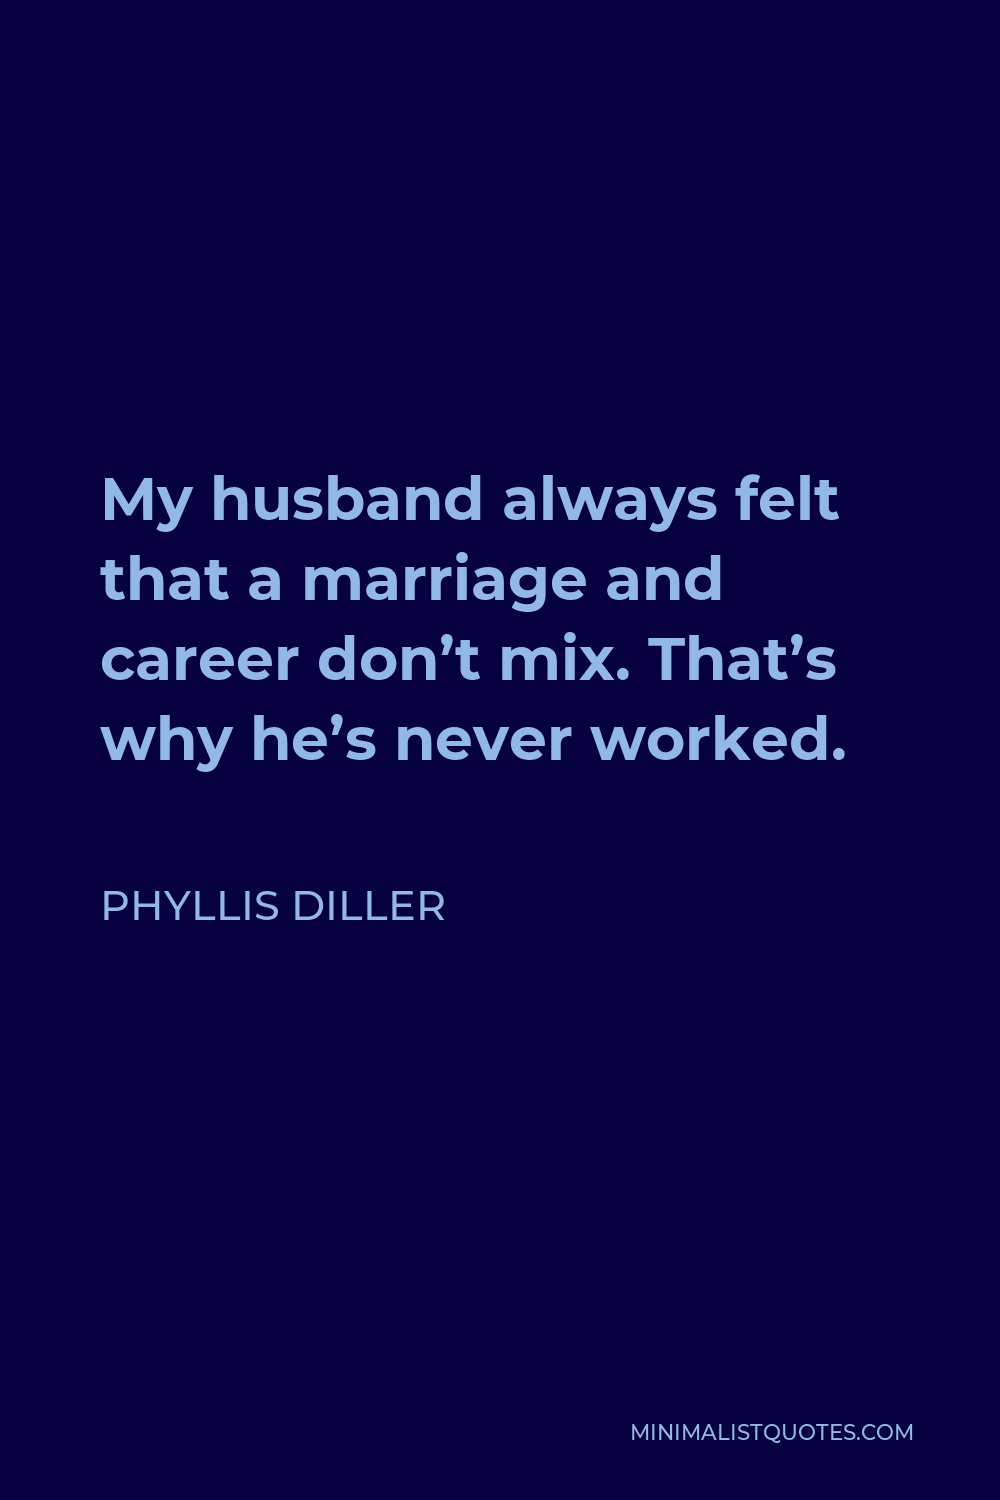 Phyllis Diller Quote - My husband always felt that a marriage and career don’t mix. That’s why he’s never worked.